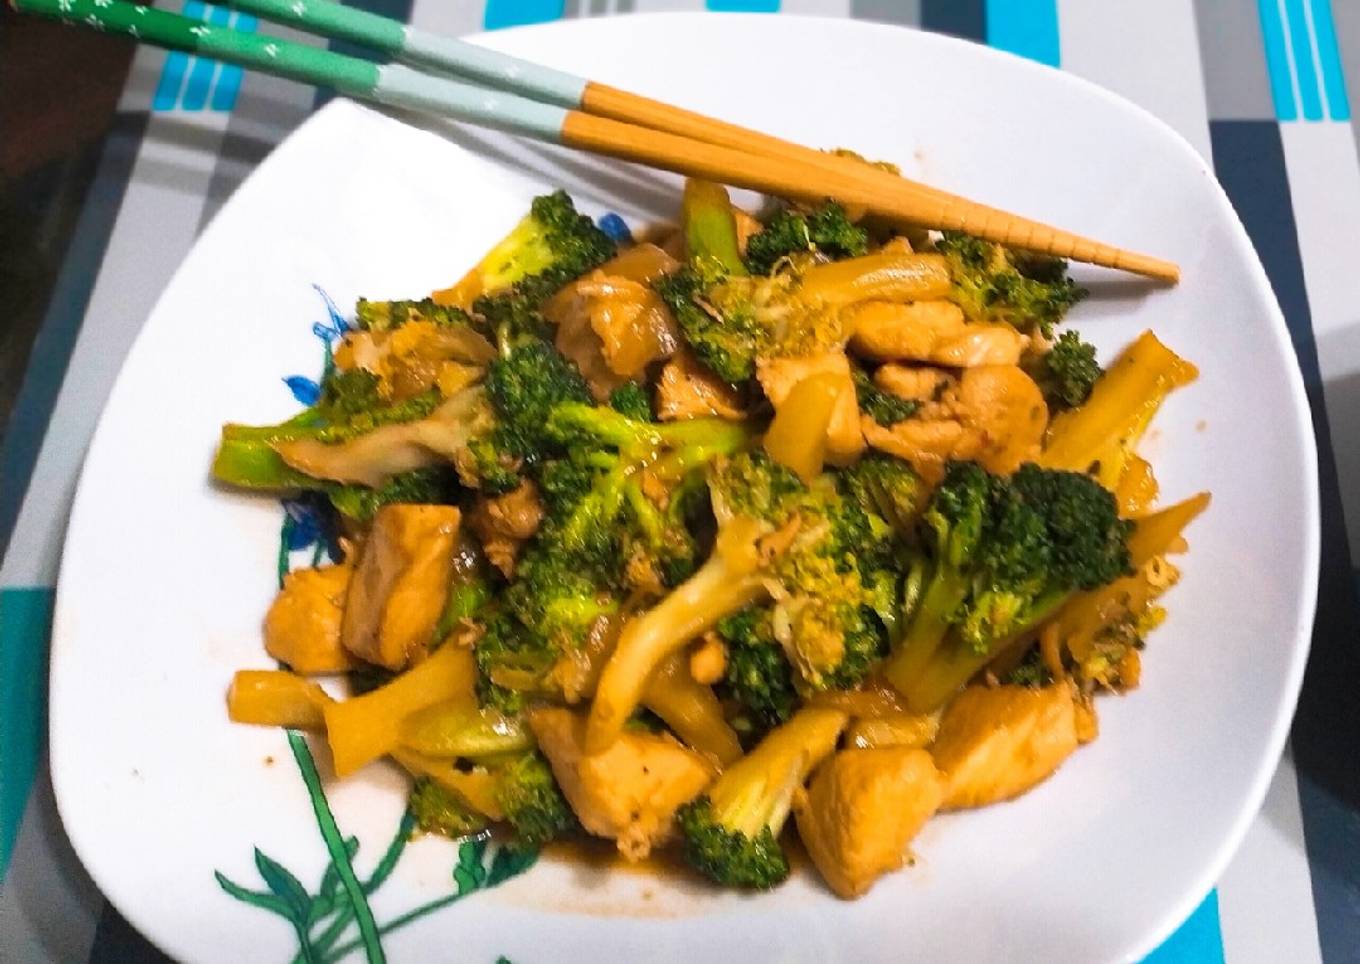 Salted broccoli with pelo